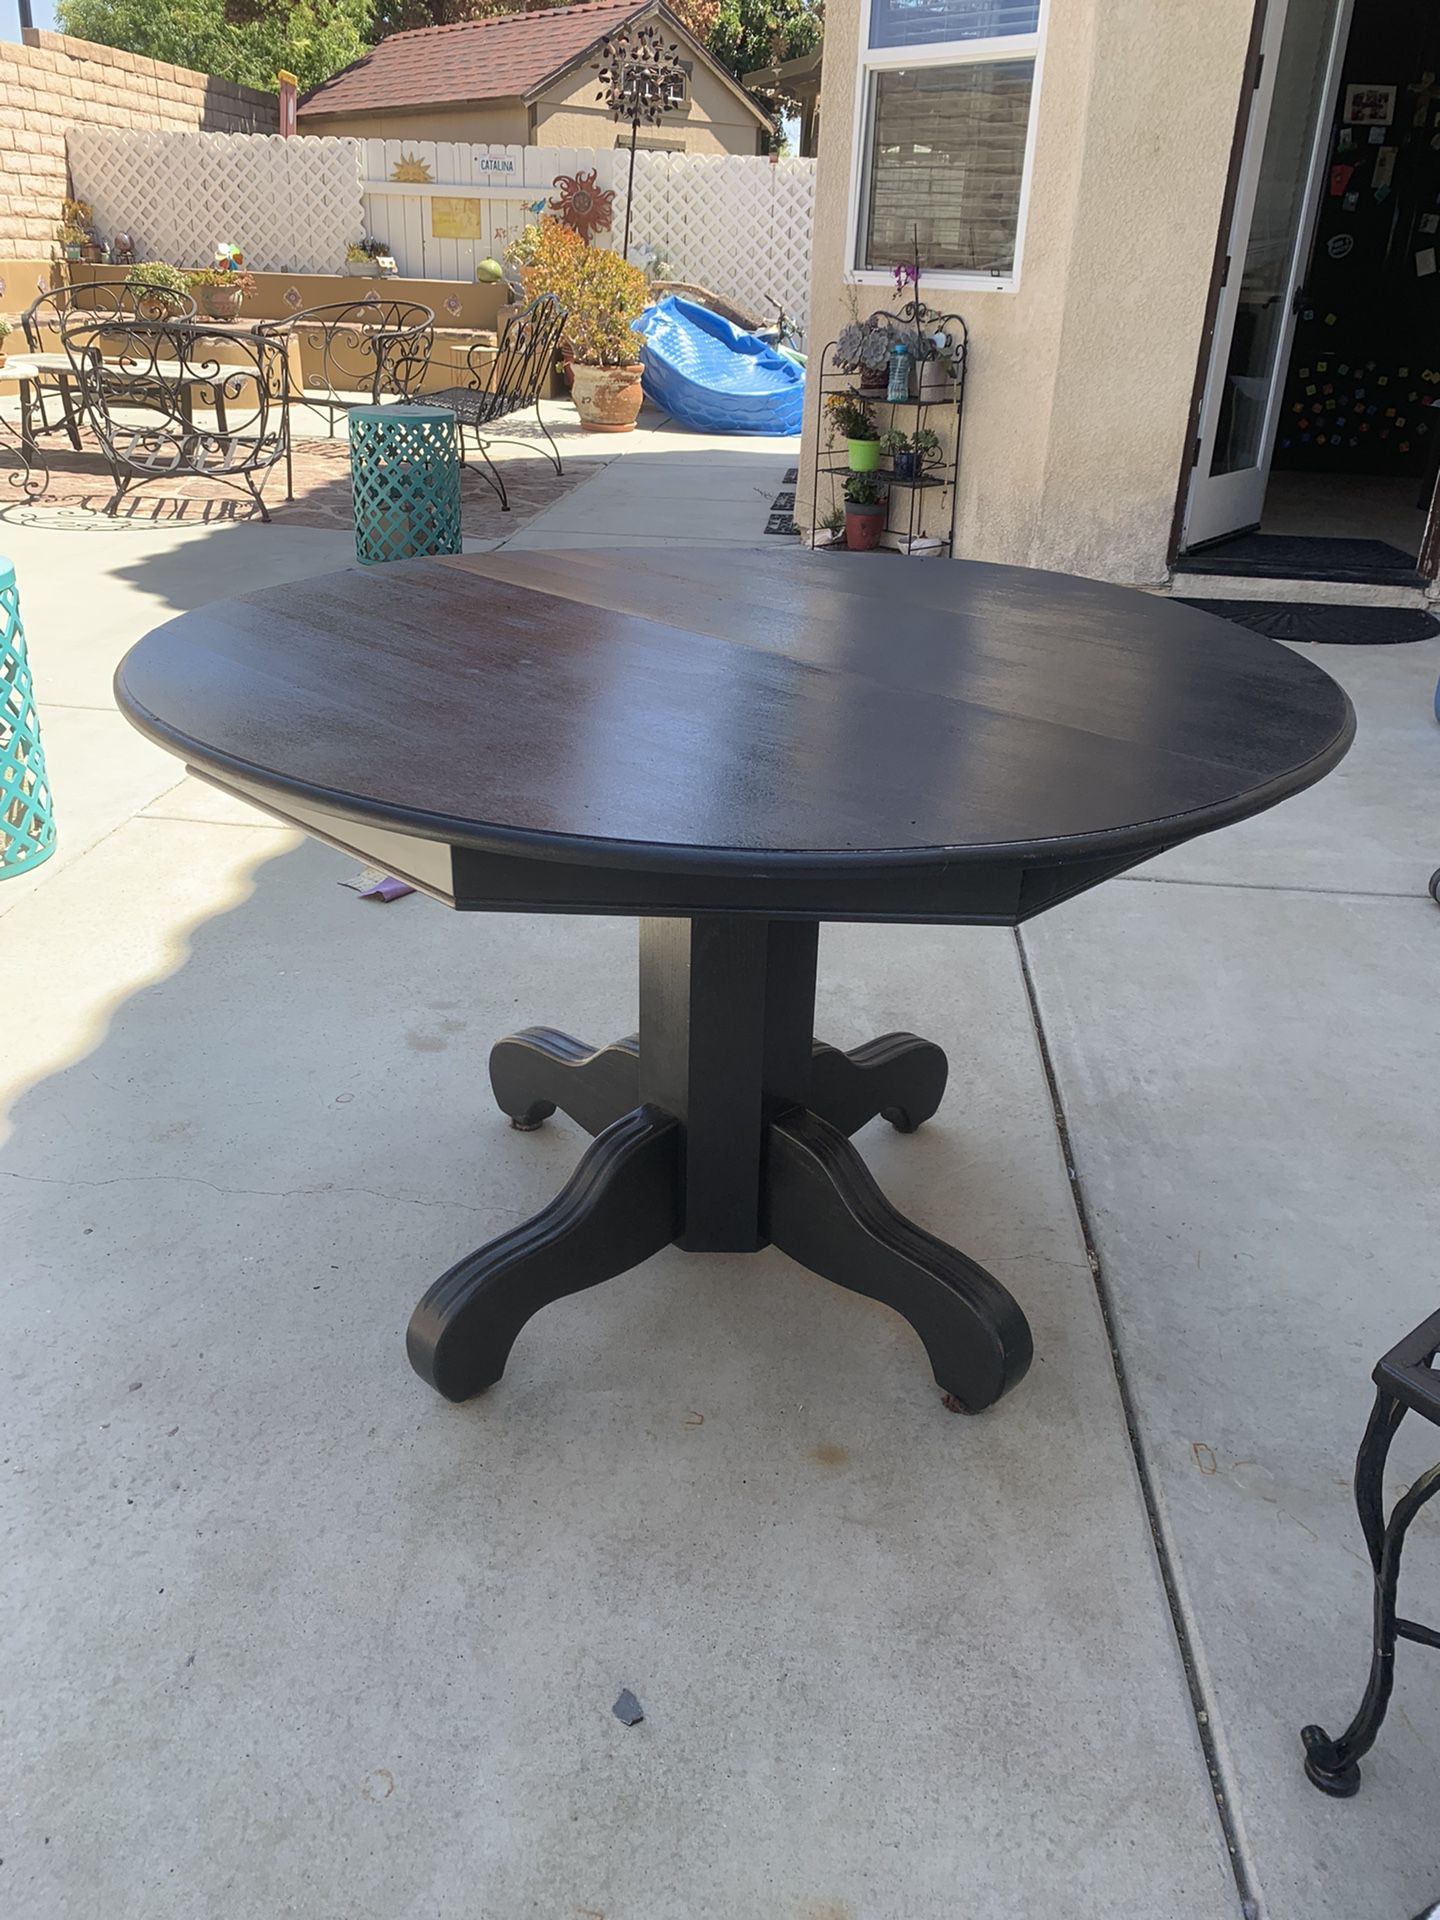 Round Wooden Dining Table (furniture Restoration)